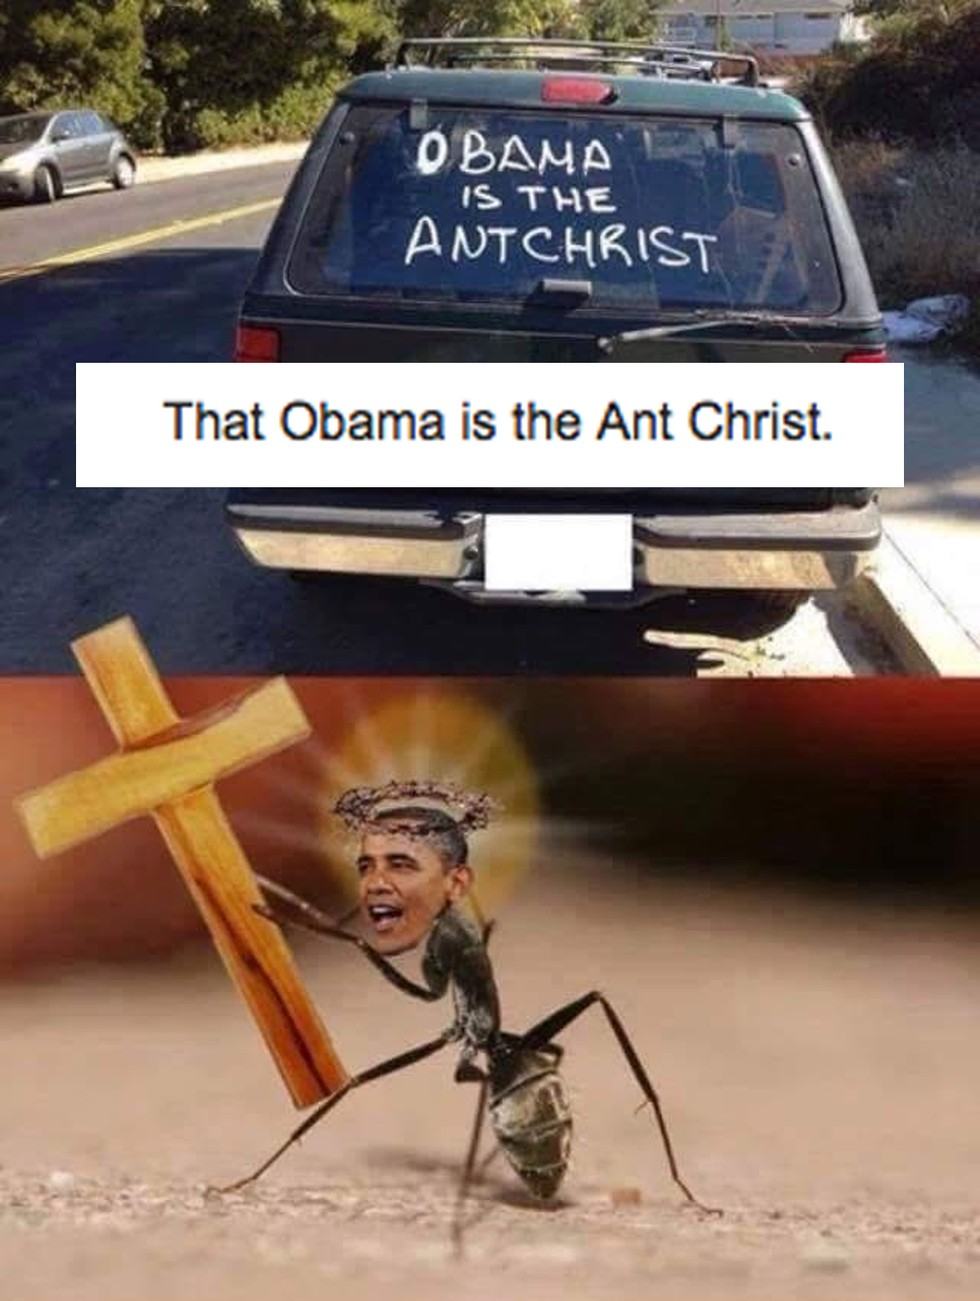 obama is the ant christ - Is The Antchrist That Obama is the Ant Christ.